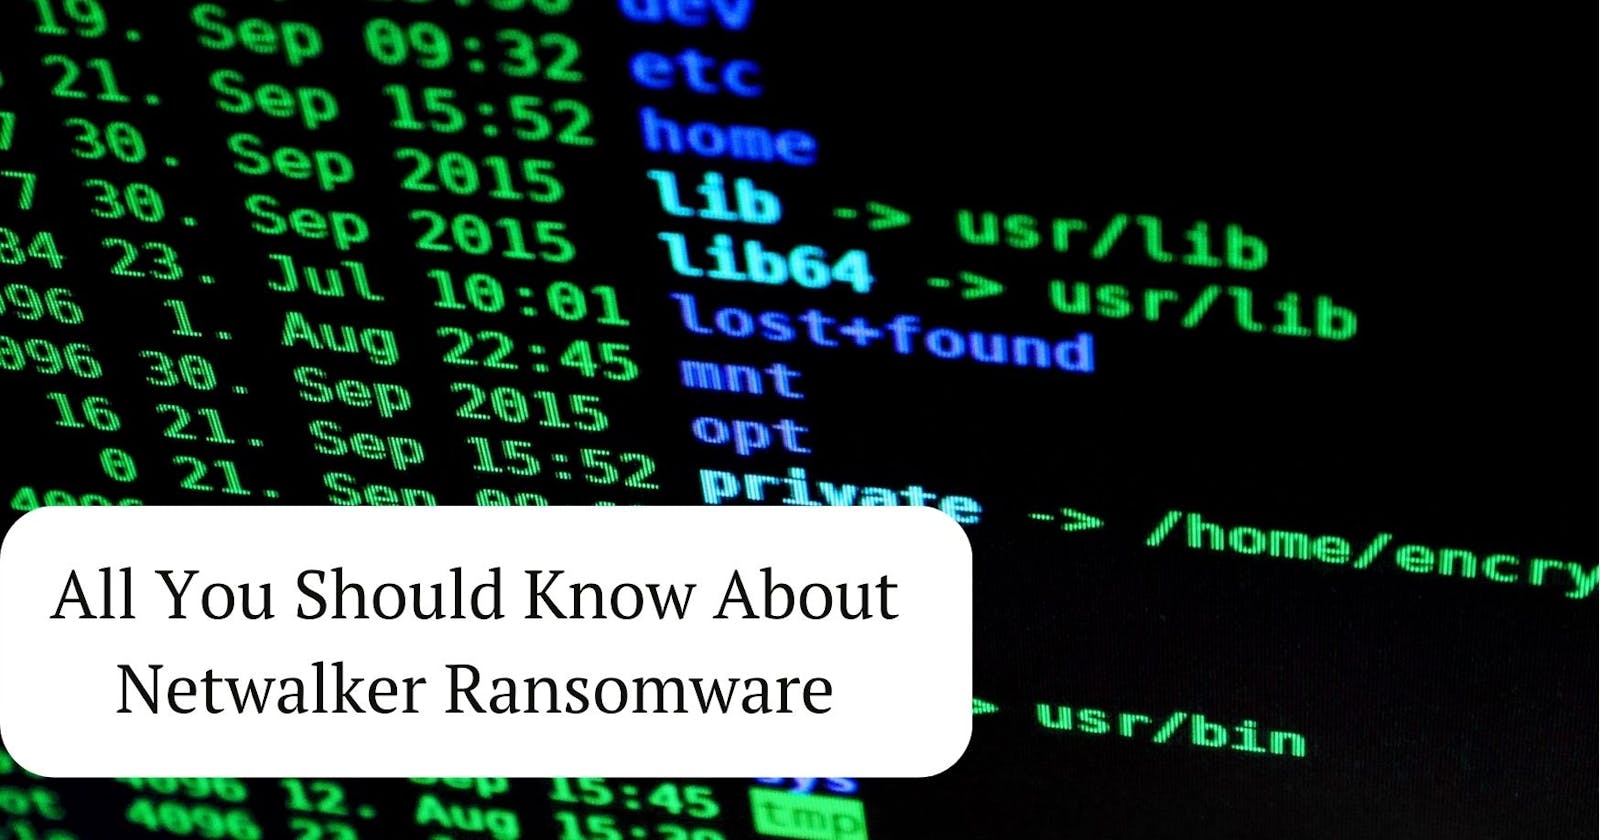 What You Need to Know About Netwalker Ransomware